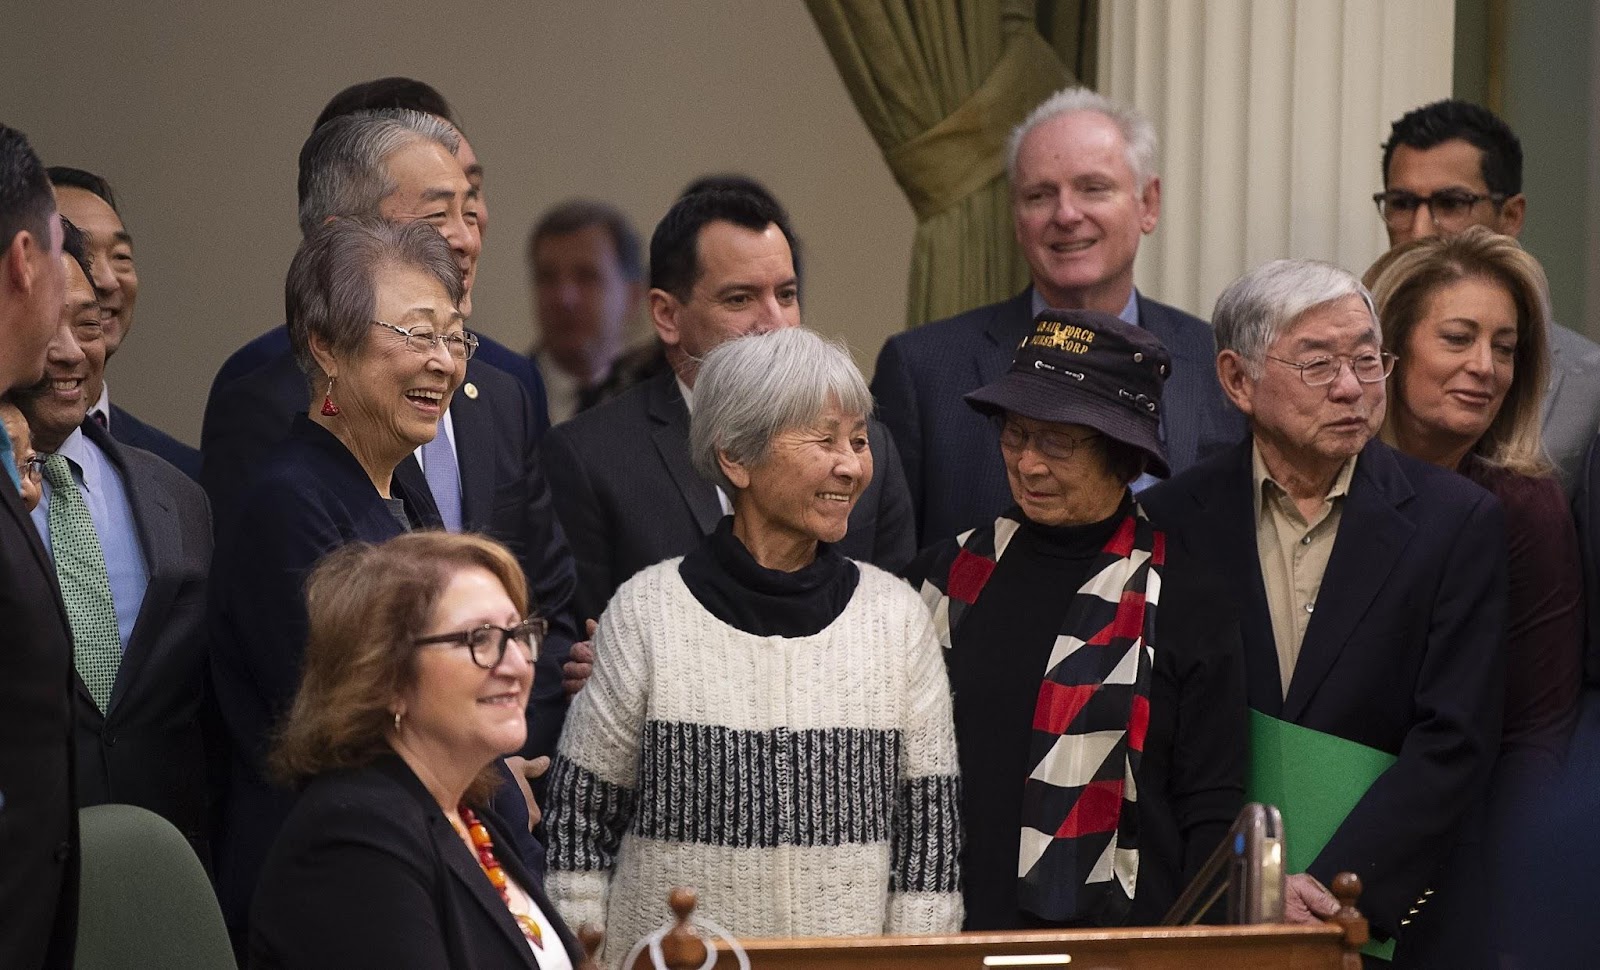 On February 20, 2020, the California Assembly apologized to for racial discrimination against, and participation in the federal government’s internment of, Japanese Americans. Several survivors and their families joined the ceremony. Source: AP